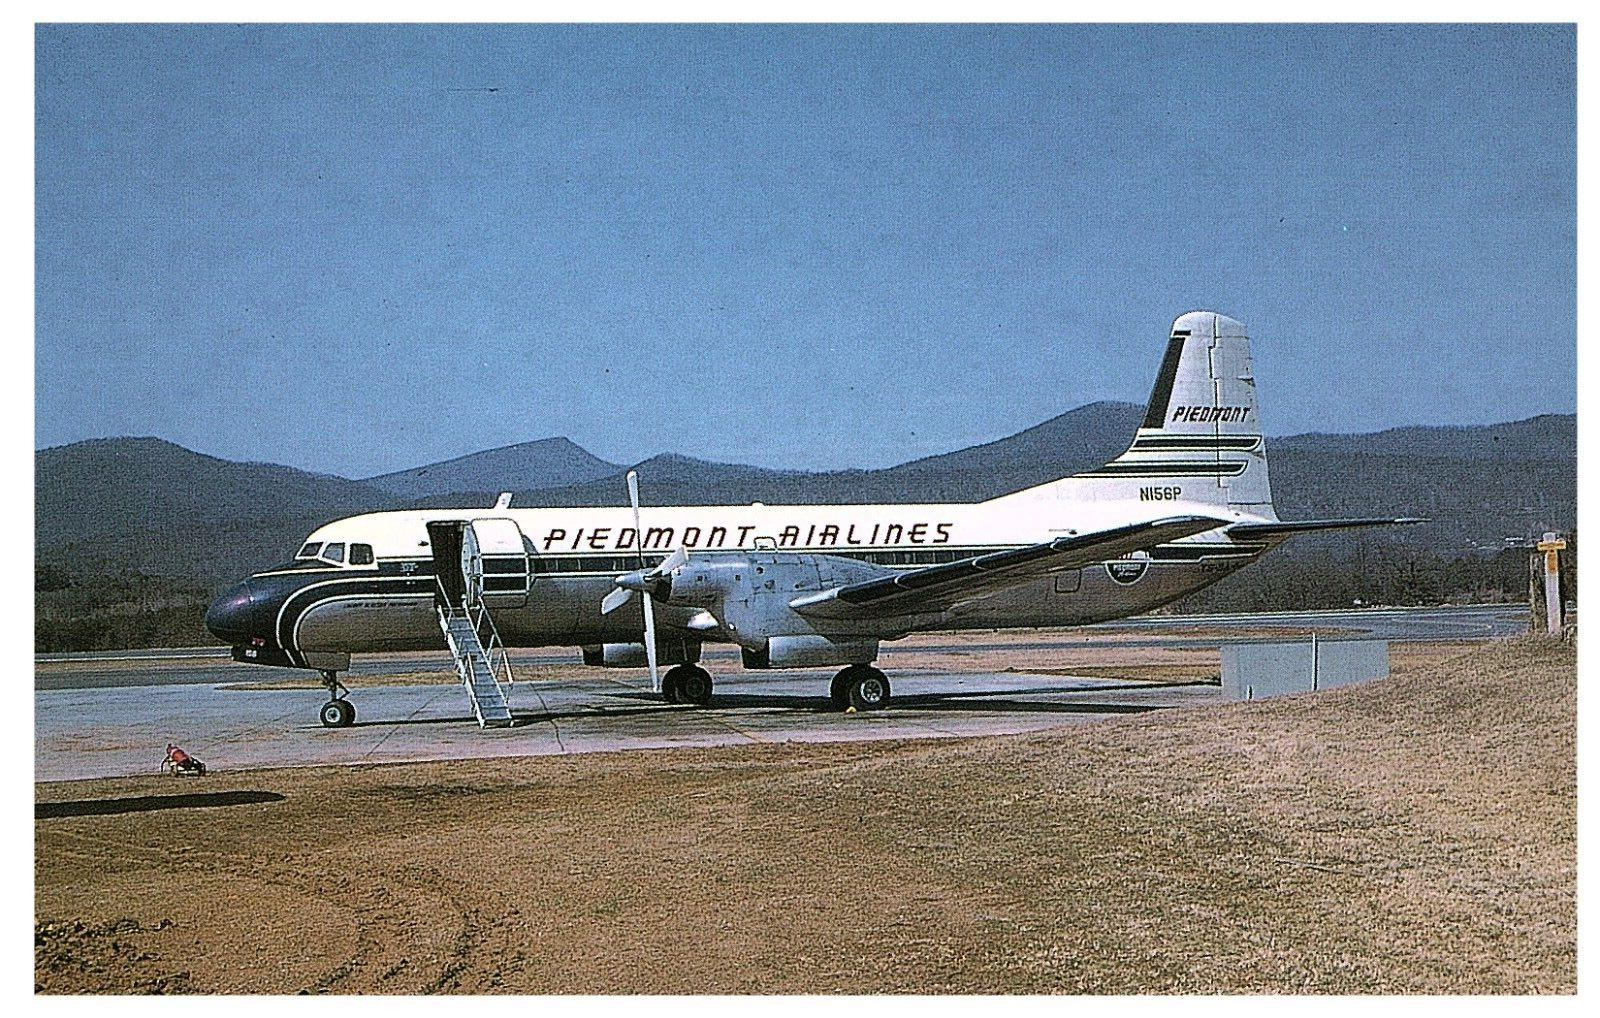 Piedmont Airlines YS 11A at Roanoke Virginia 1971 Airplane Postcard